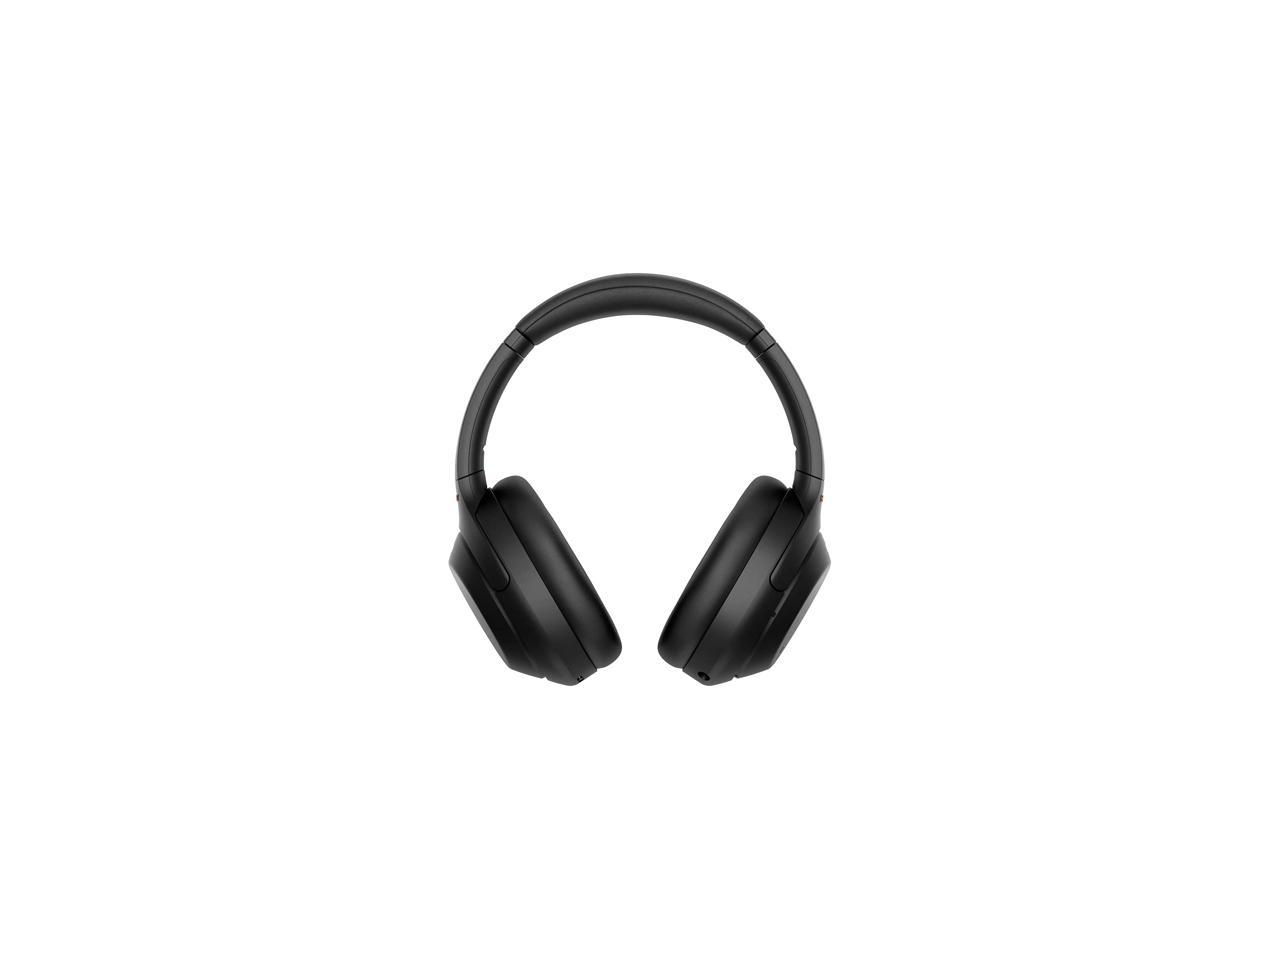 Sony WH-1000XM4 Wireless Noise-Cancelling Over-Ear Headphones (Black) $259.99 + Free Shipping